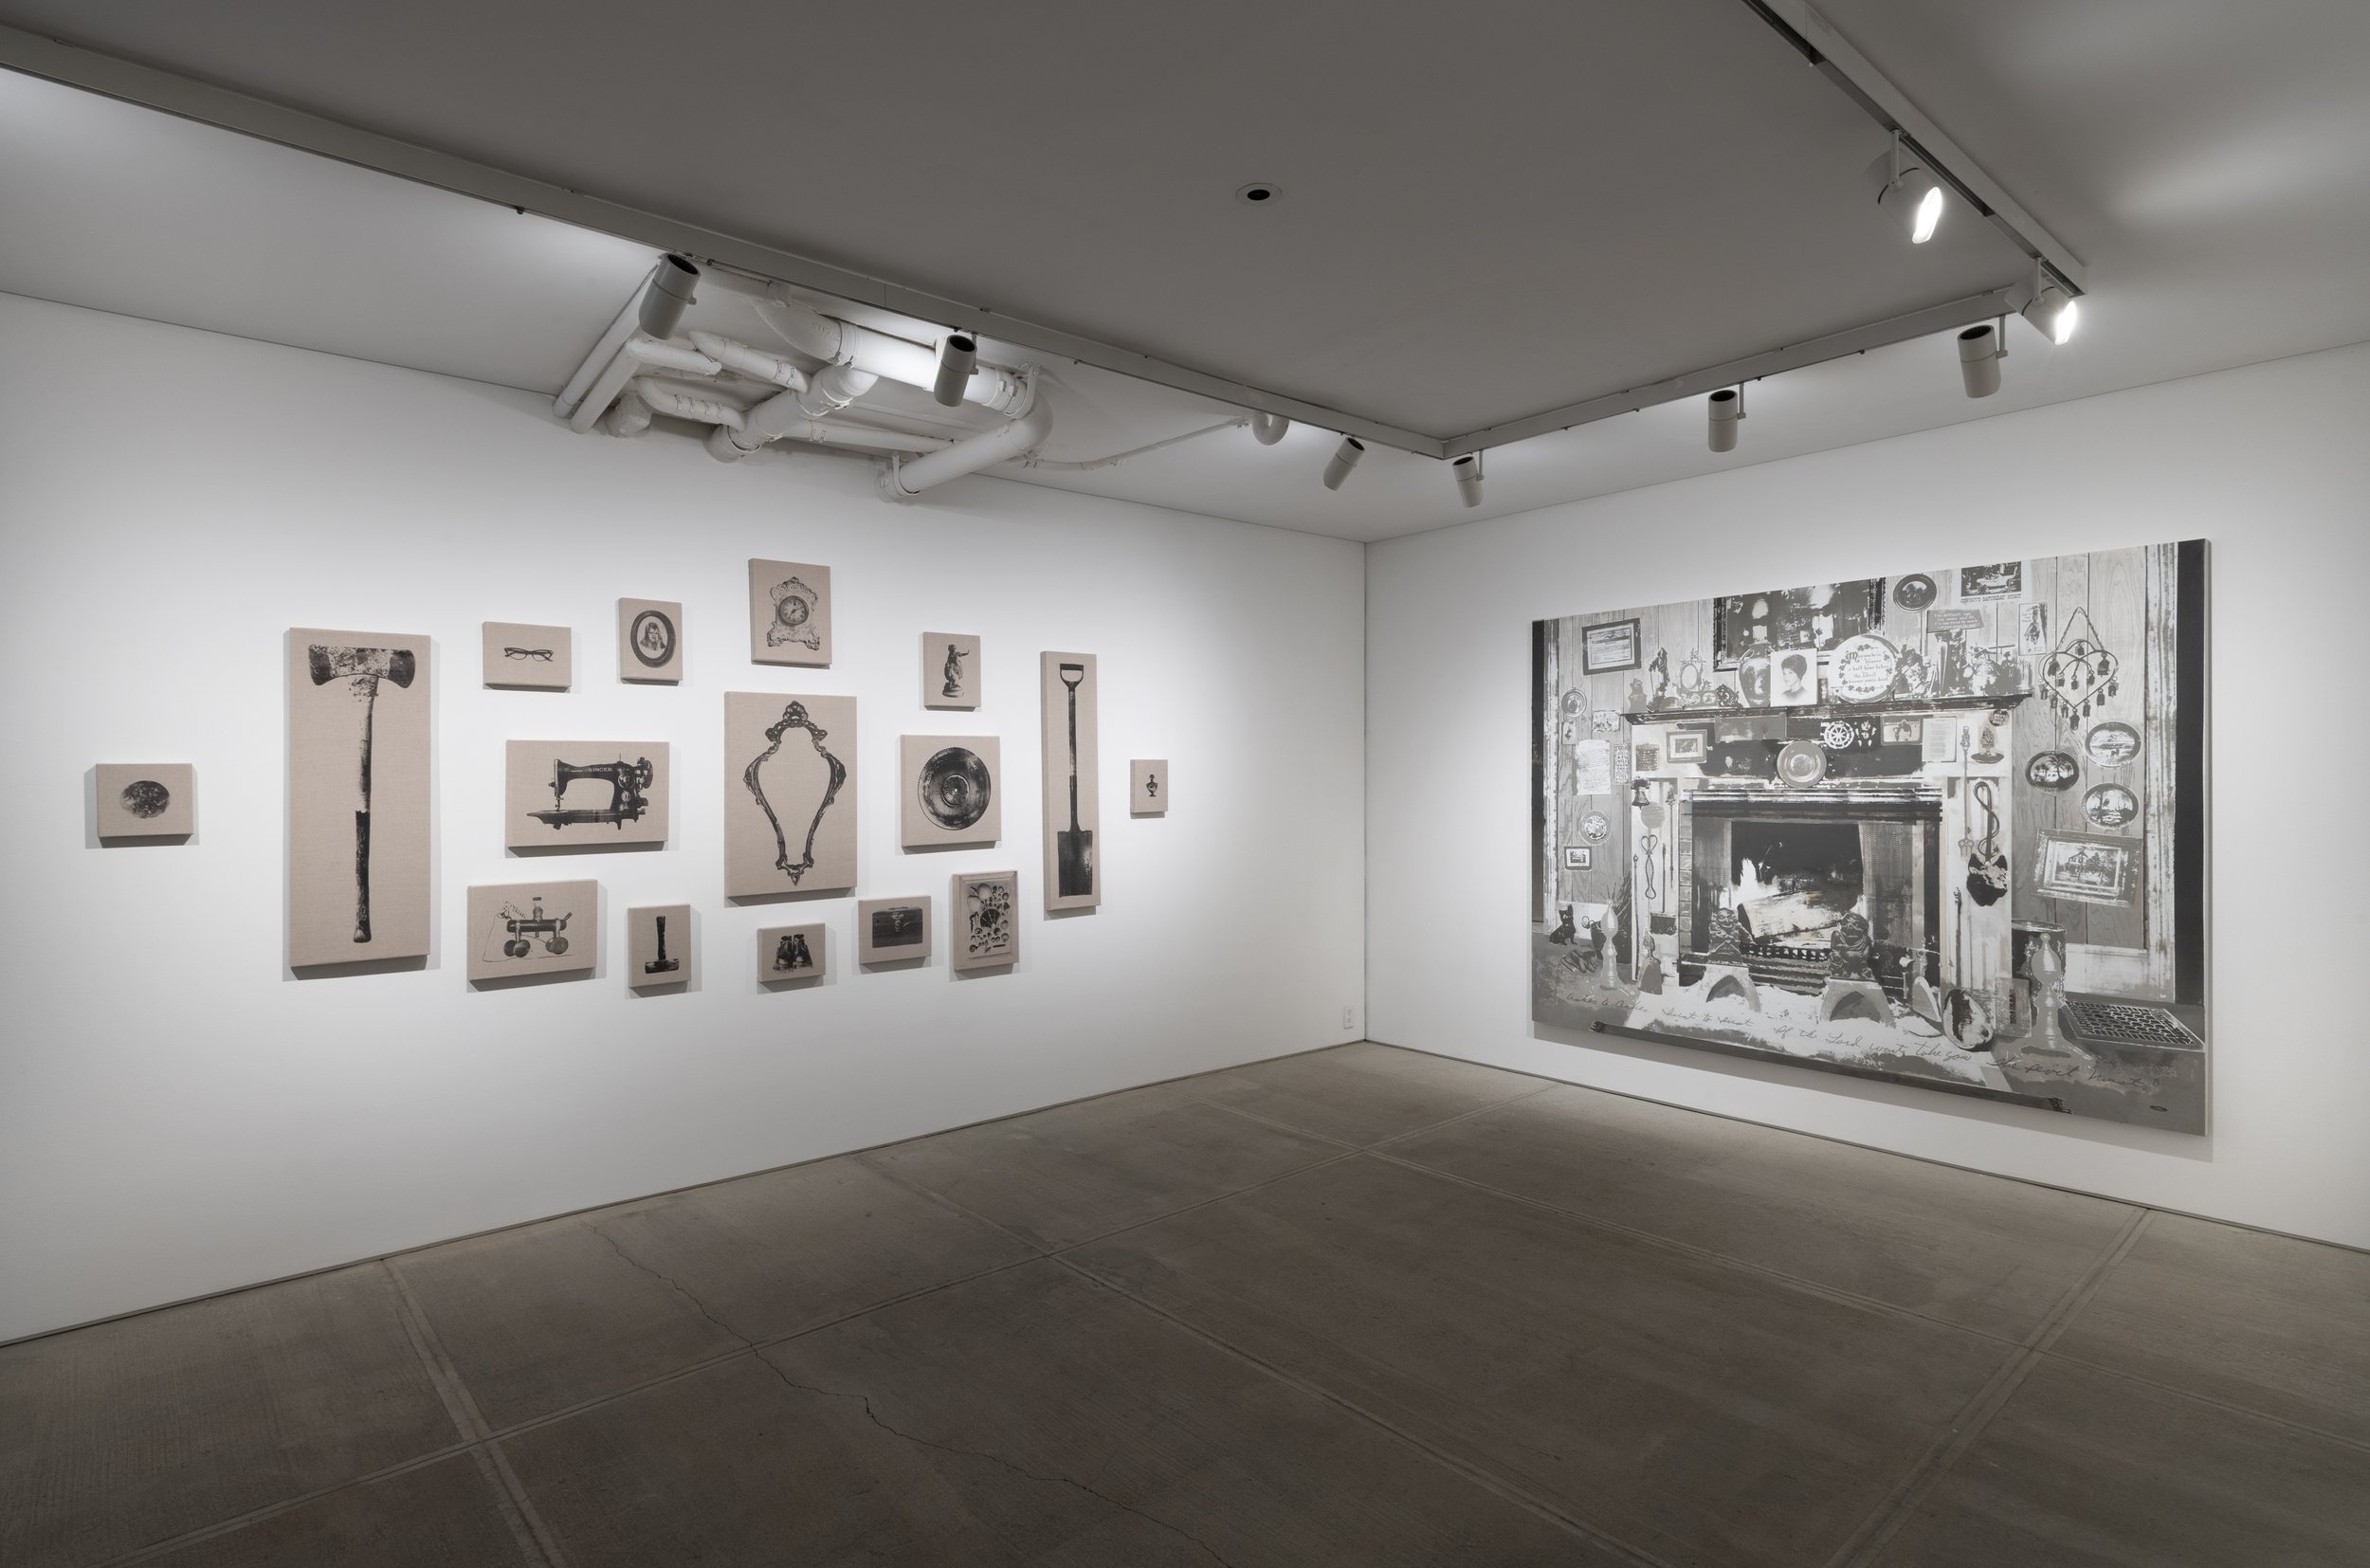 TOTAH_TRE-Letters from Home Installation View 3.jpg